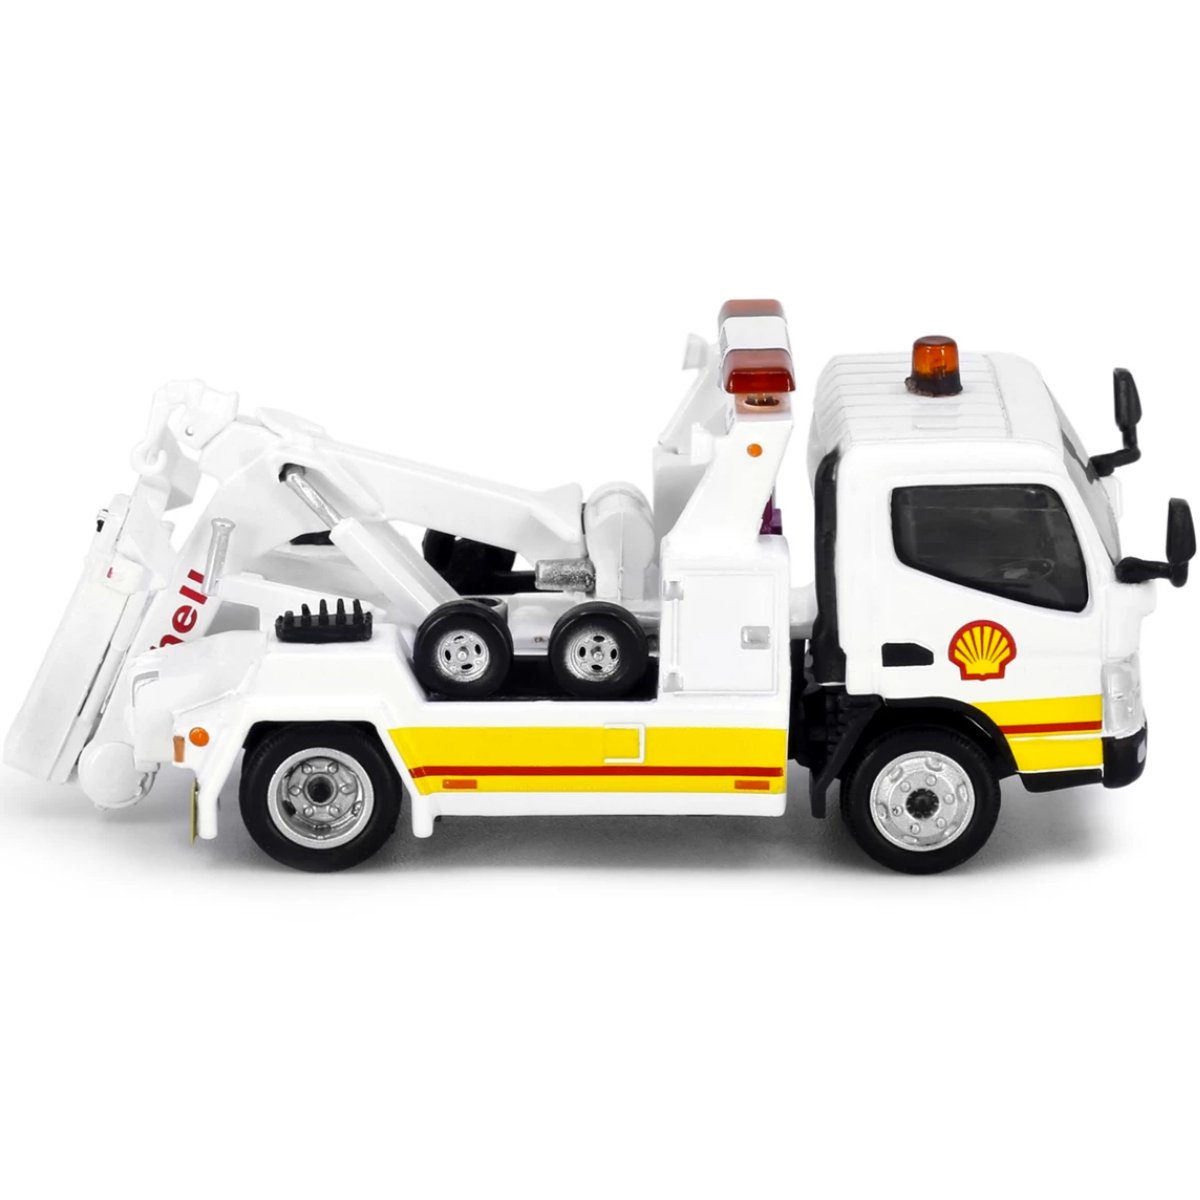 Tiny Models Mitsubishi Fuso Canter Shell Tow Truck (1:76 Scale)